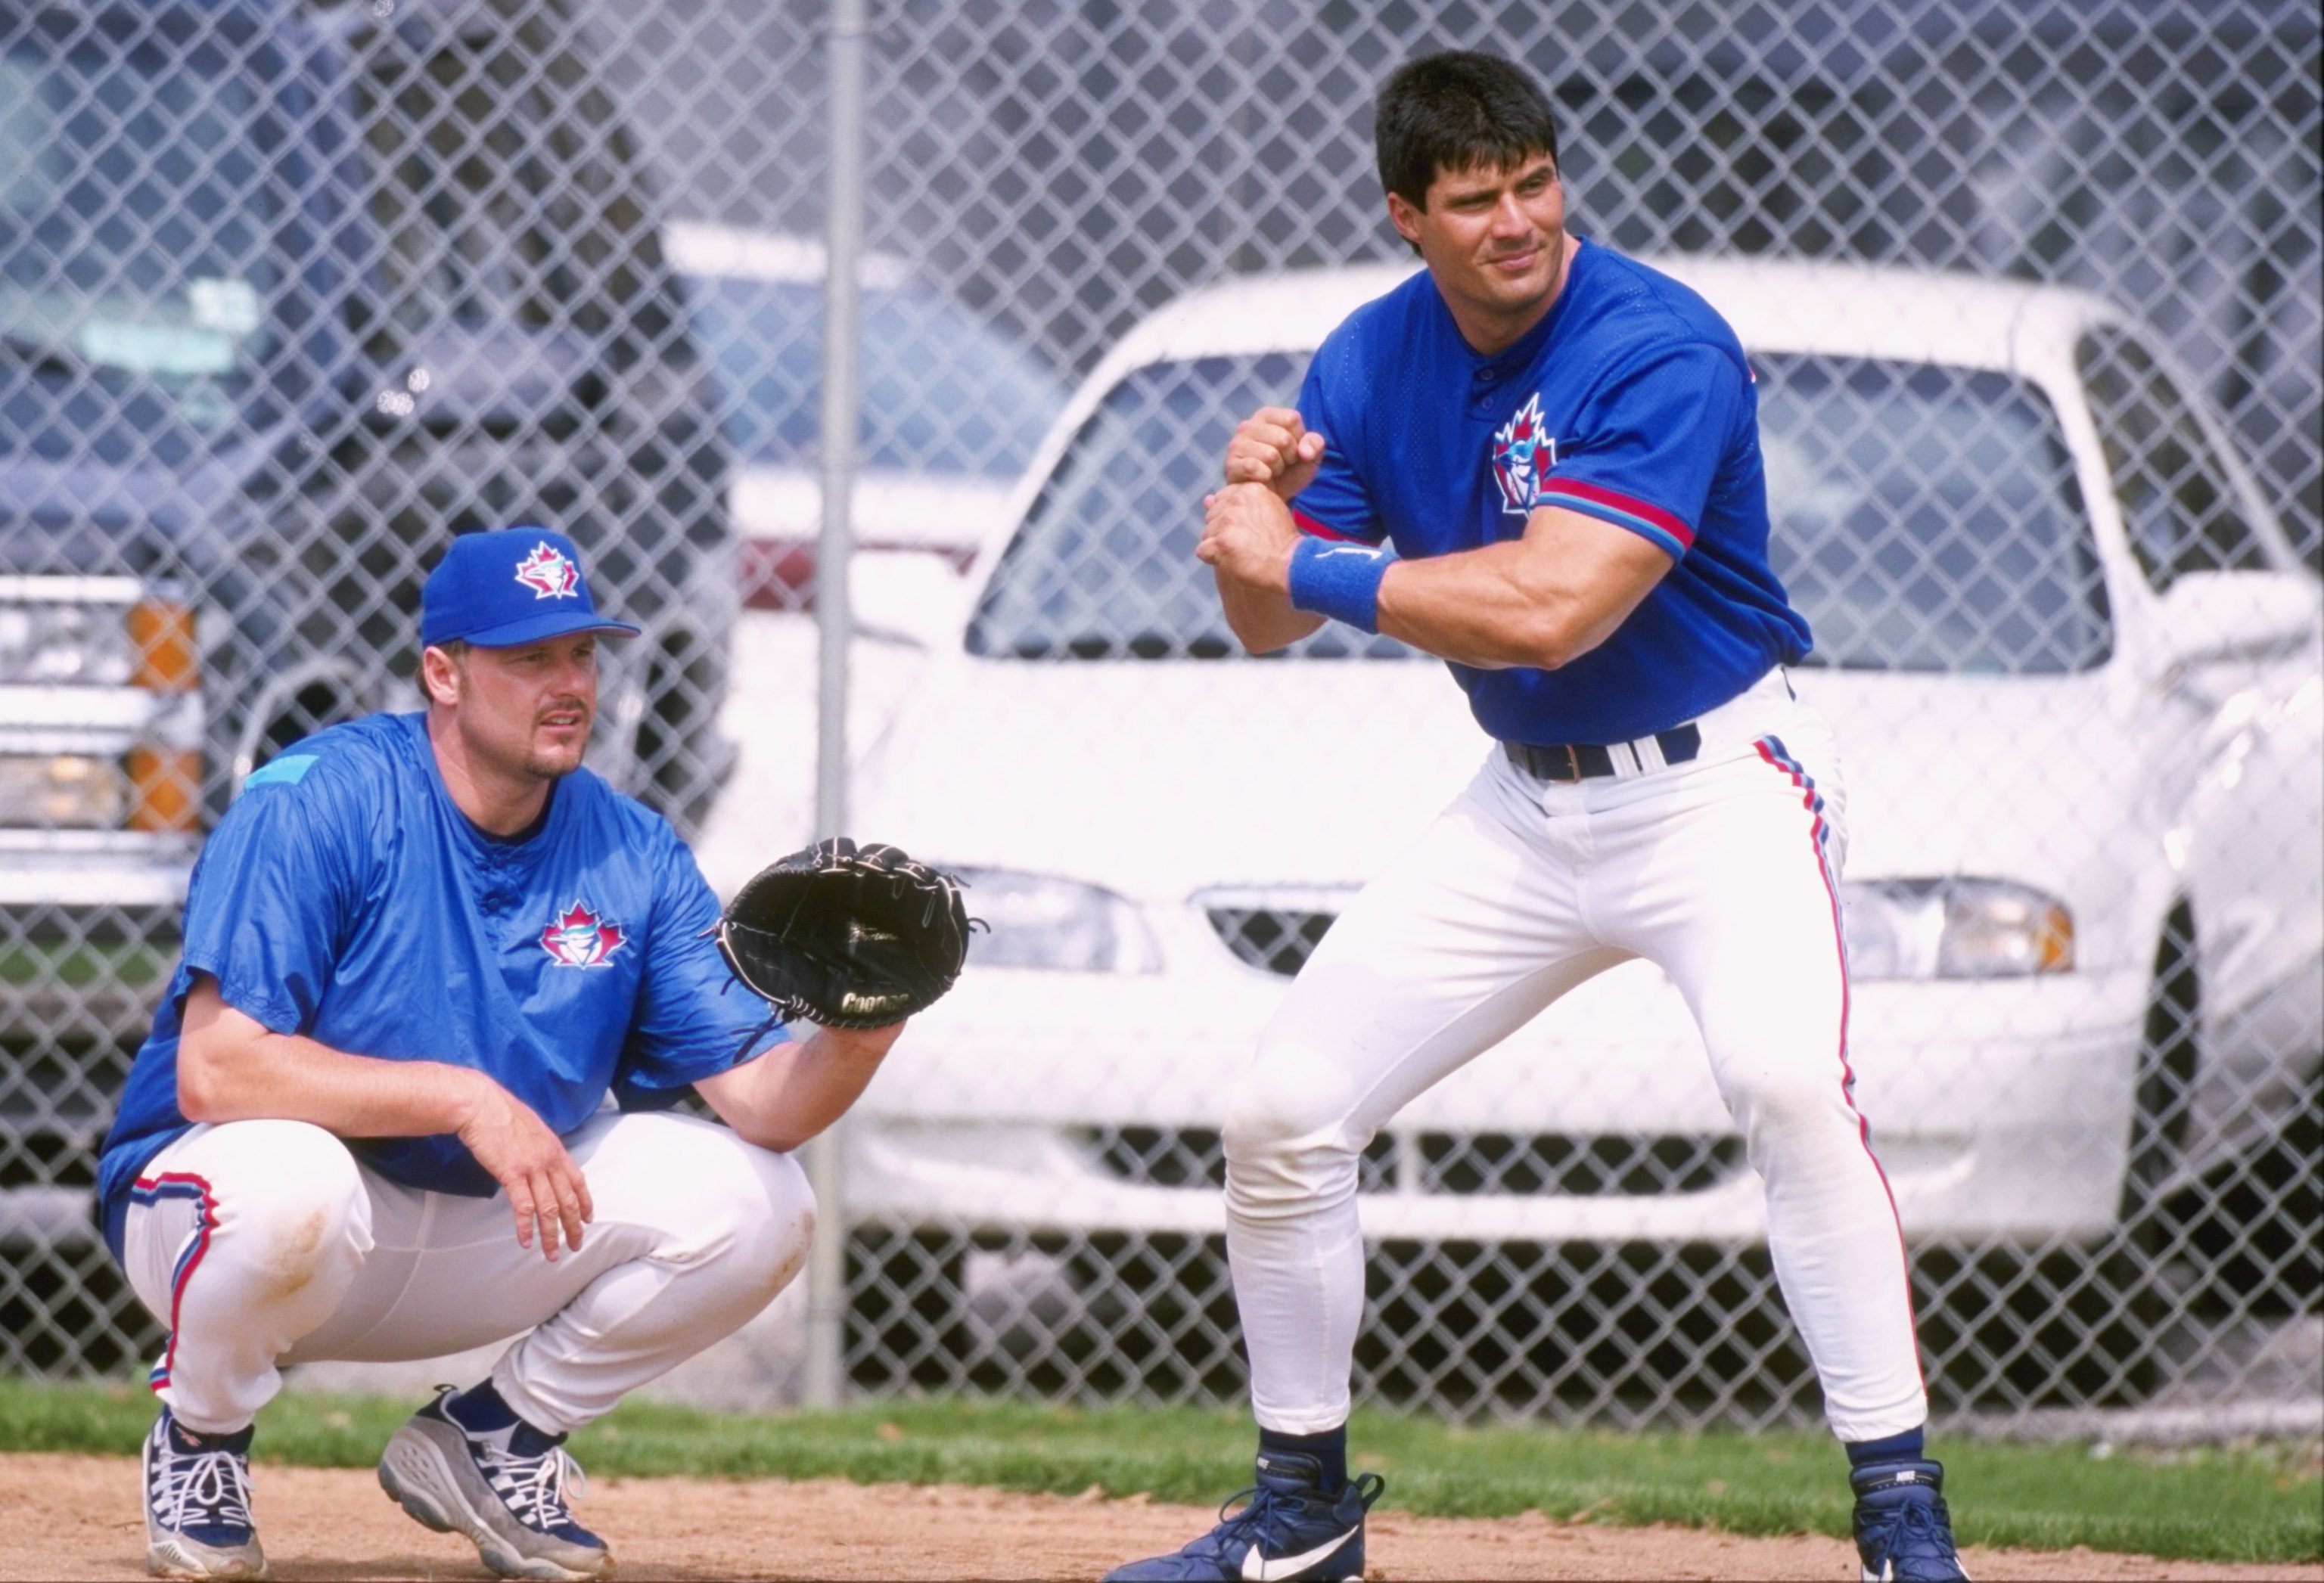 Jose Canseco - Cooperstown Expert